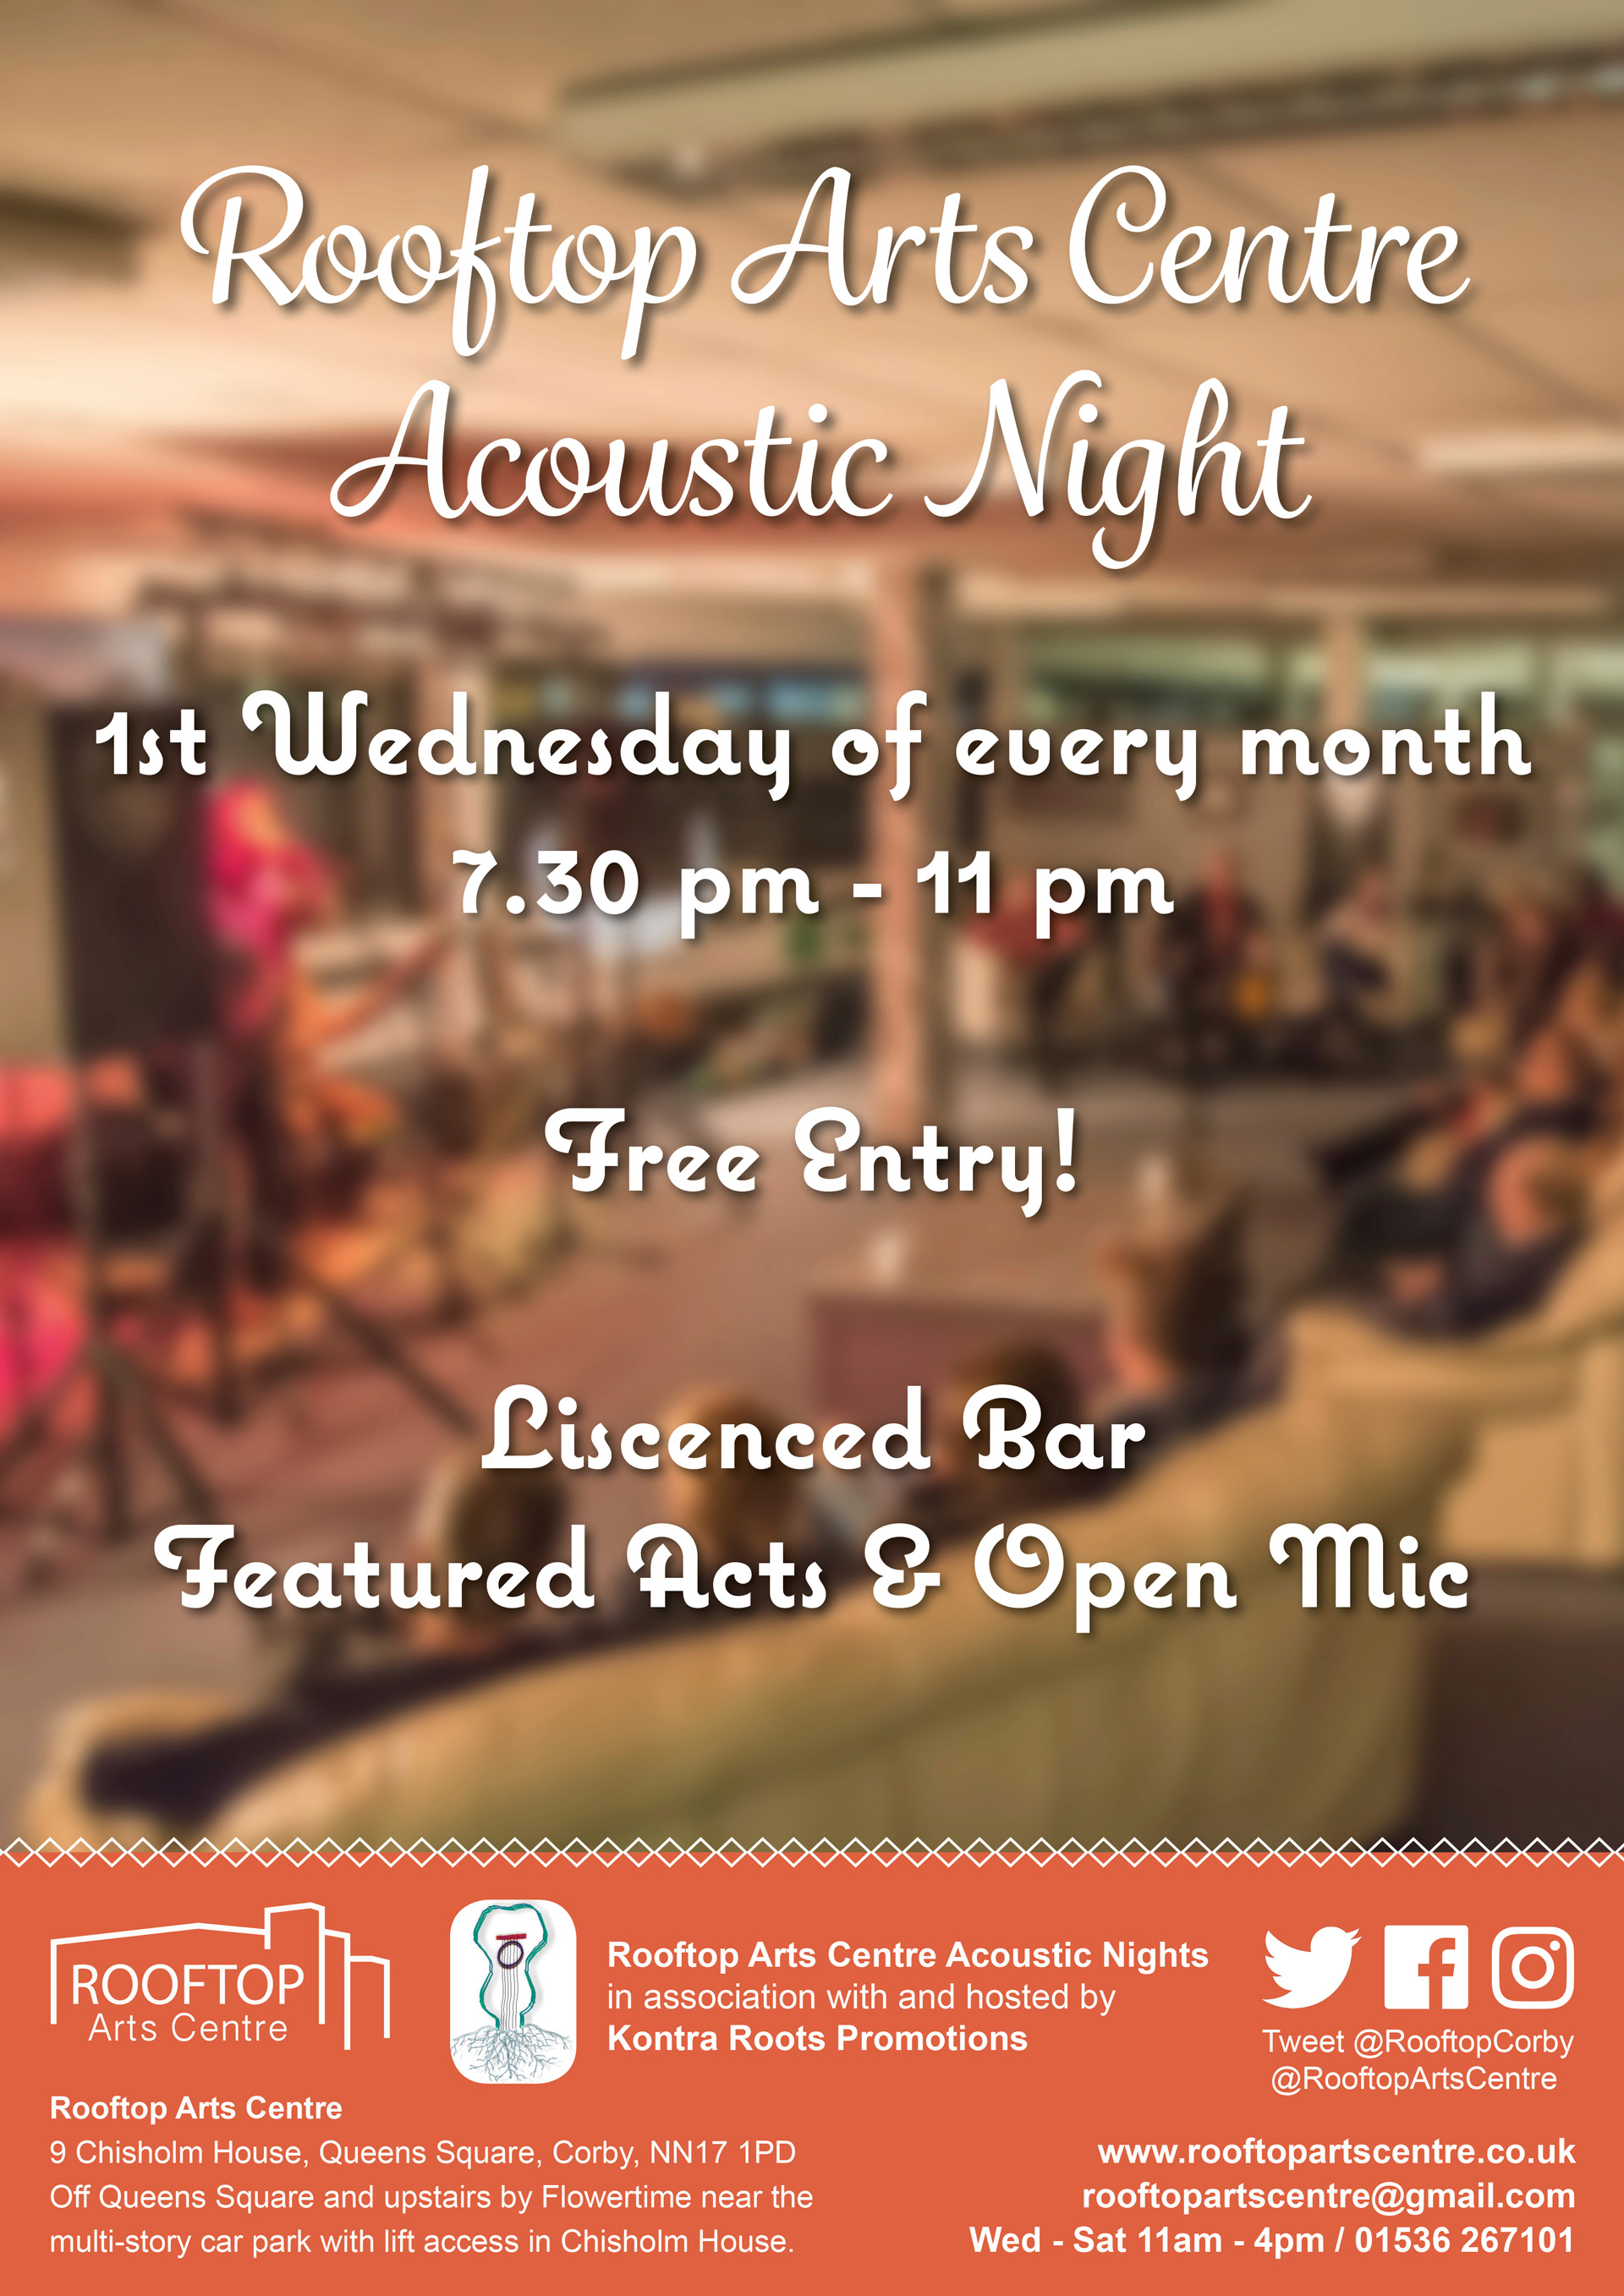 Poster advertising Acoustic Nights at the Rooftop Arts Centre